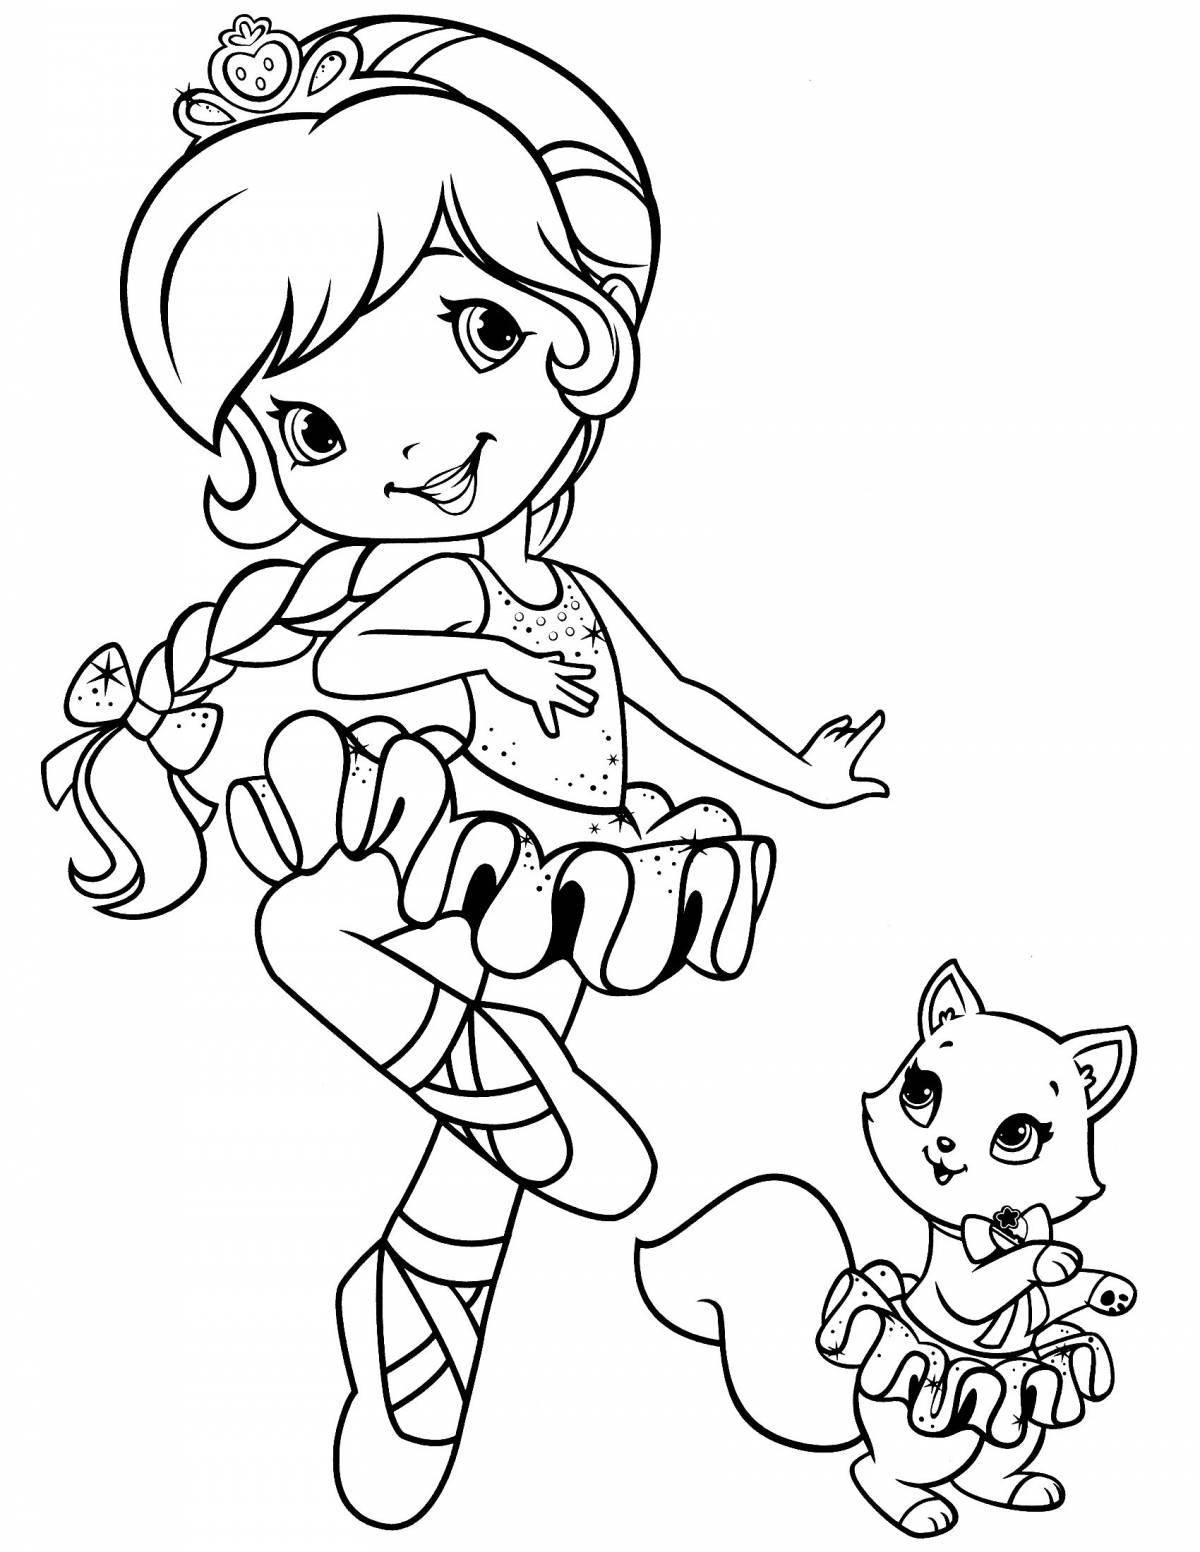 Fabulous charlotte strawberry coloring pages for girls